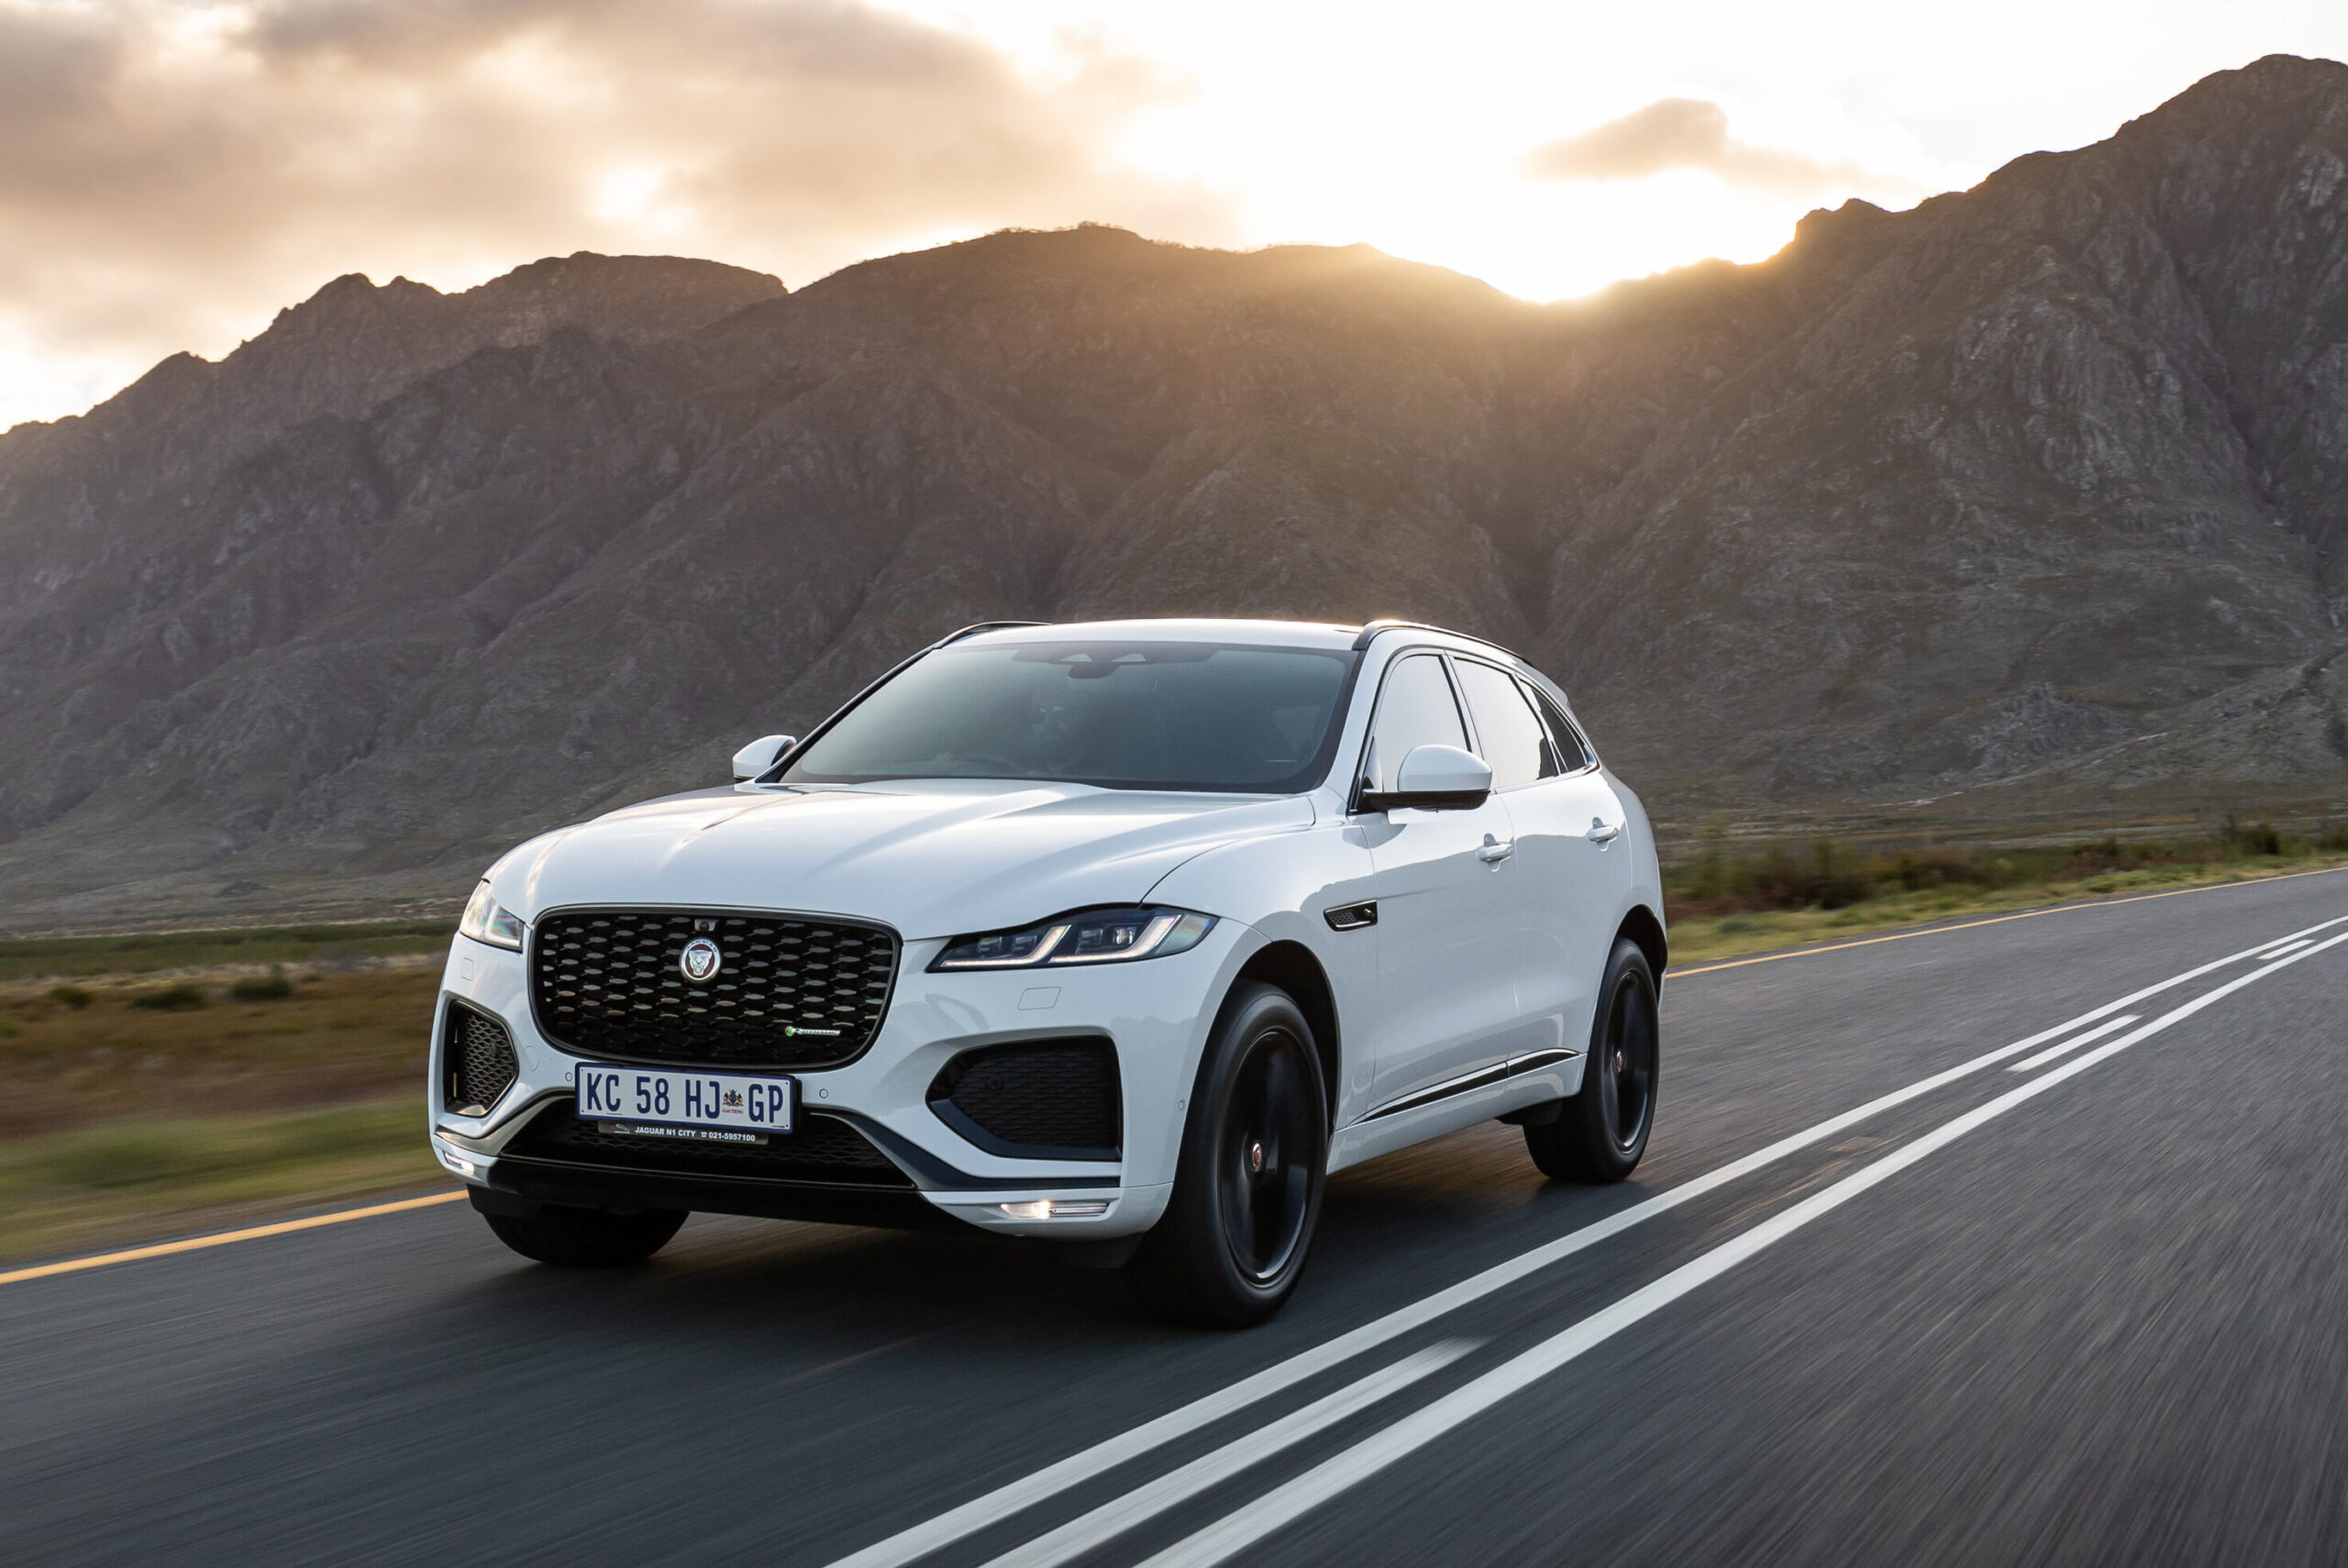 Jaguar F-PACE, Updated exterior and technology, Sophisticated SUV, Superior driving experience, 2560x1710 HD Desktop